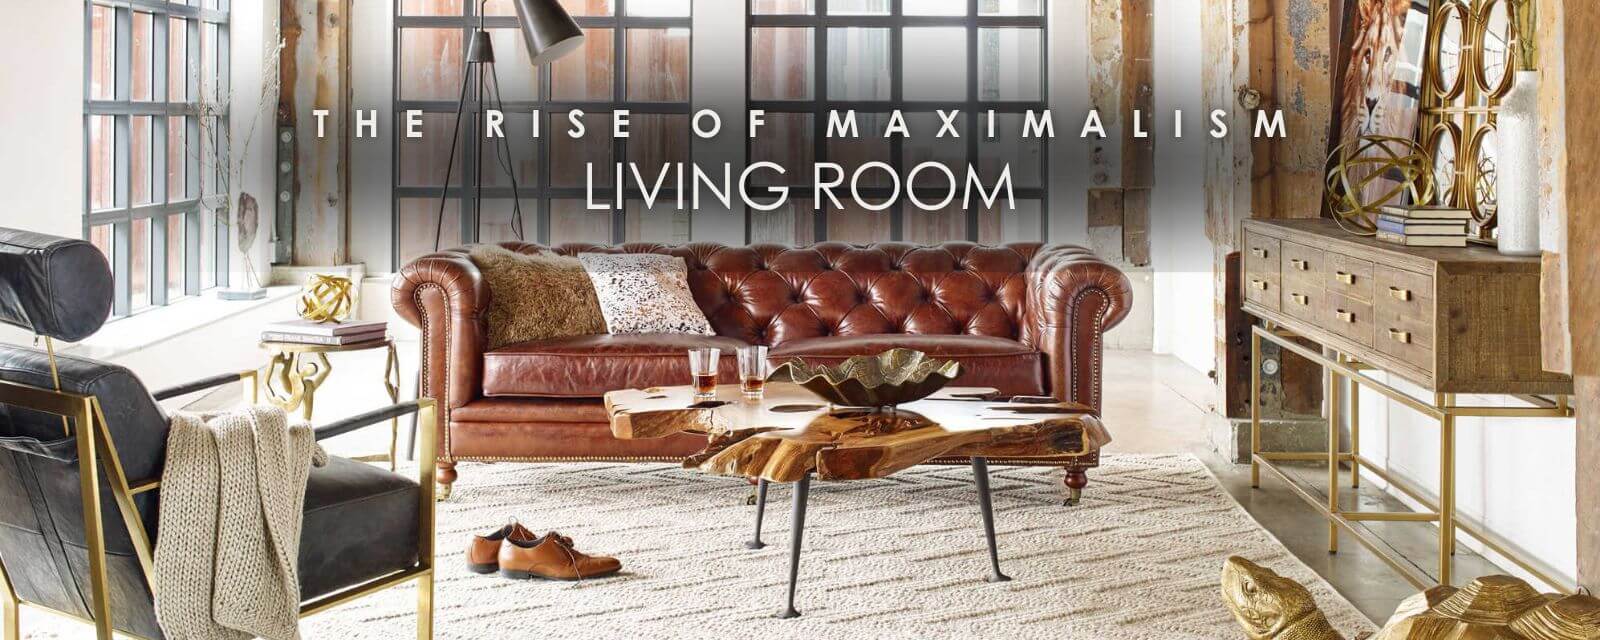 The Rise of Maximalism | Living Room